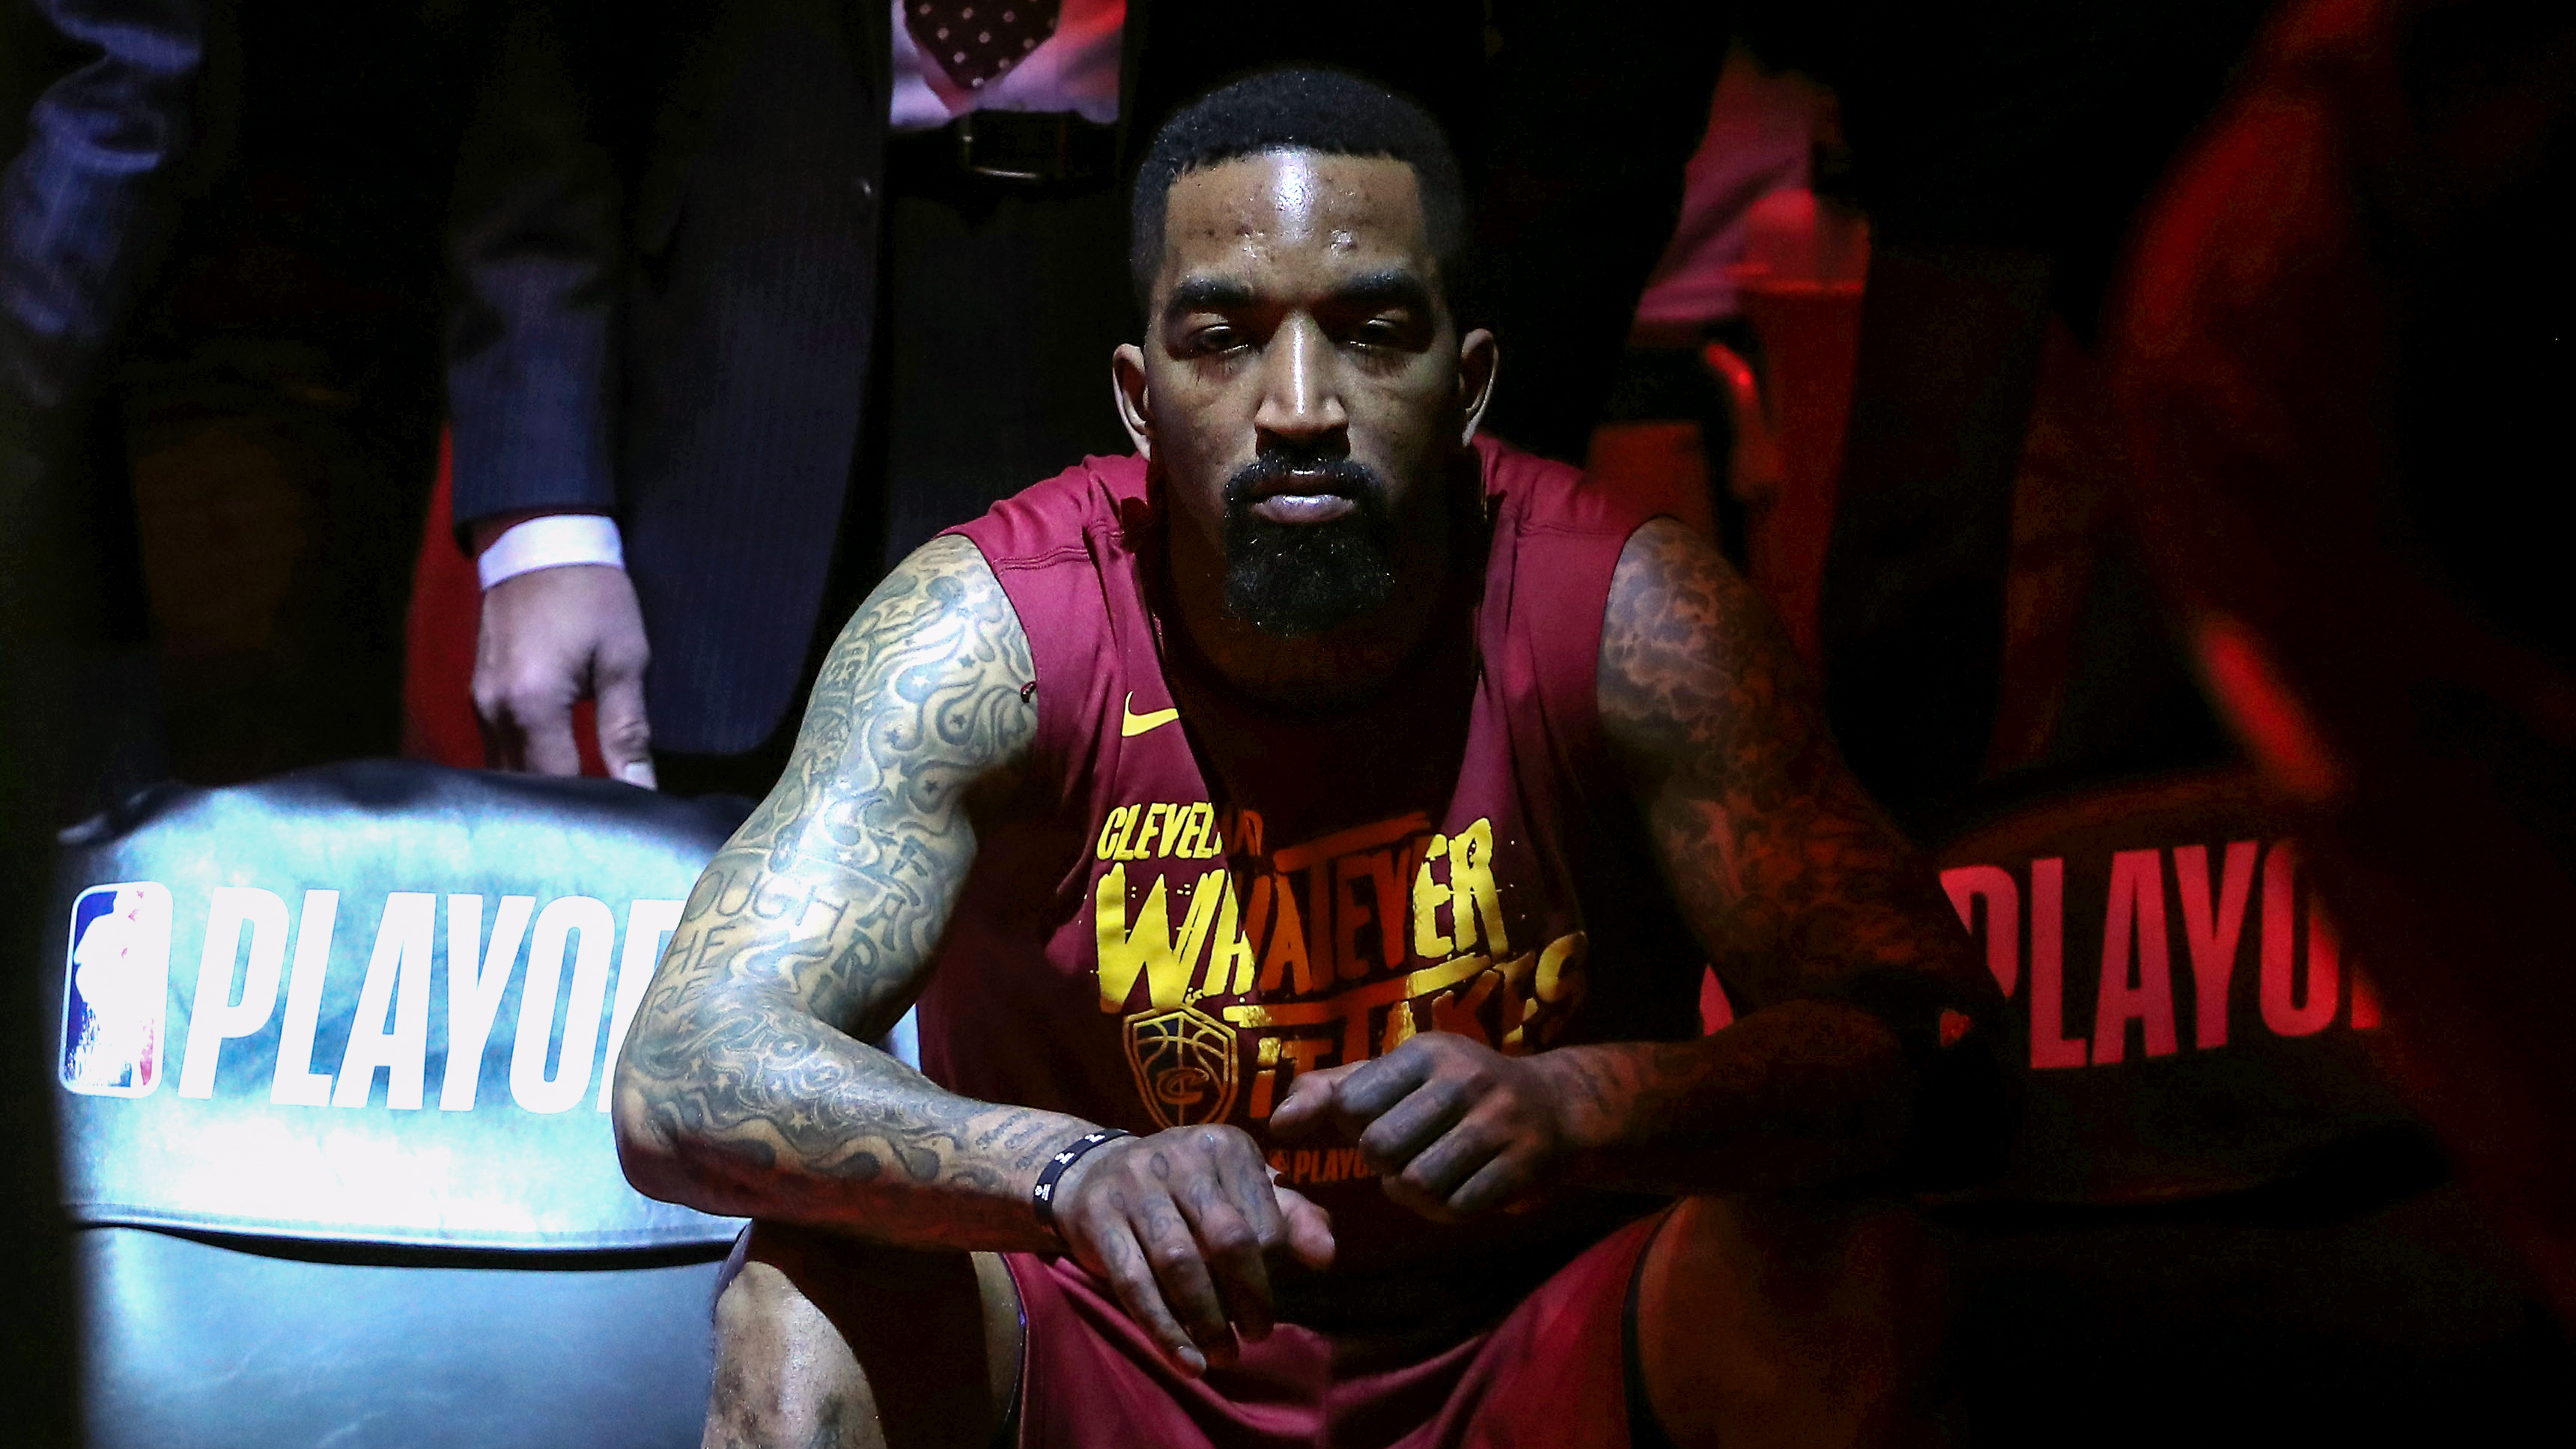 The Cleveland Cavaliers got JR Smith from the team of New York Knicks